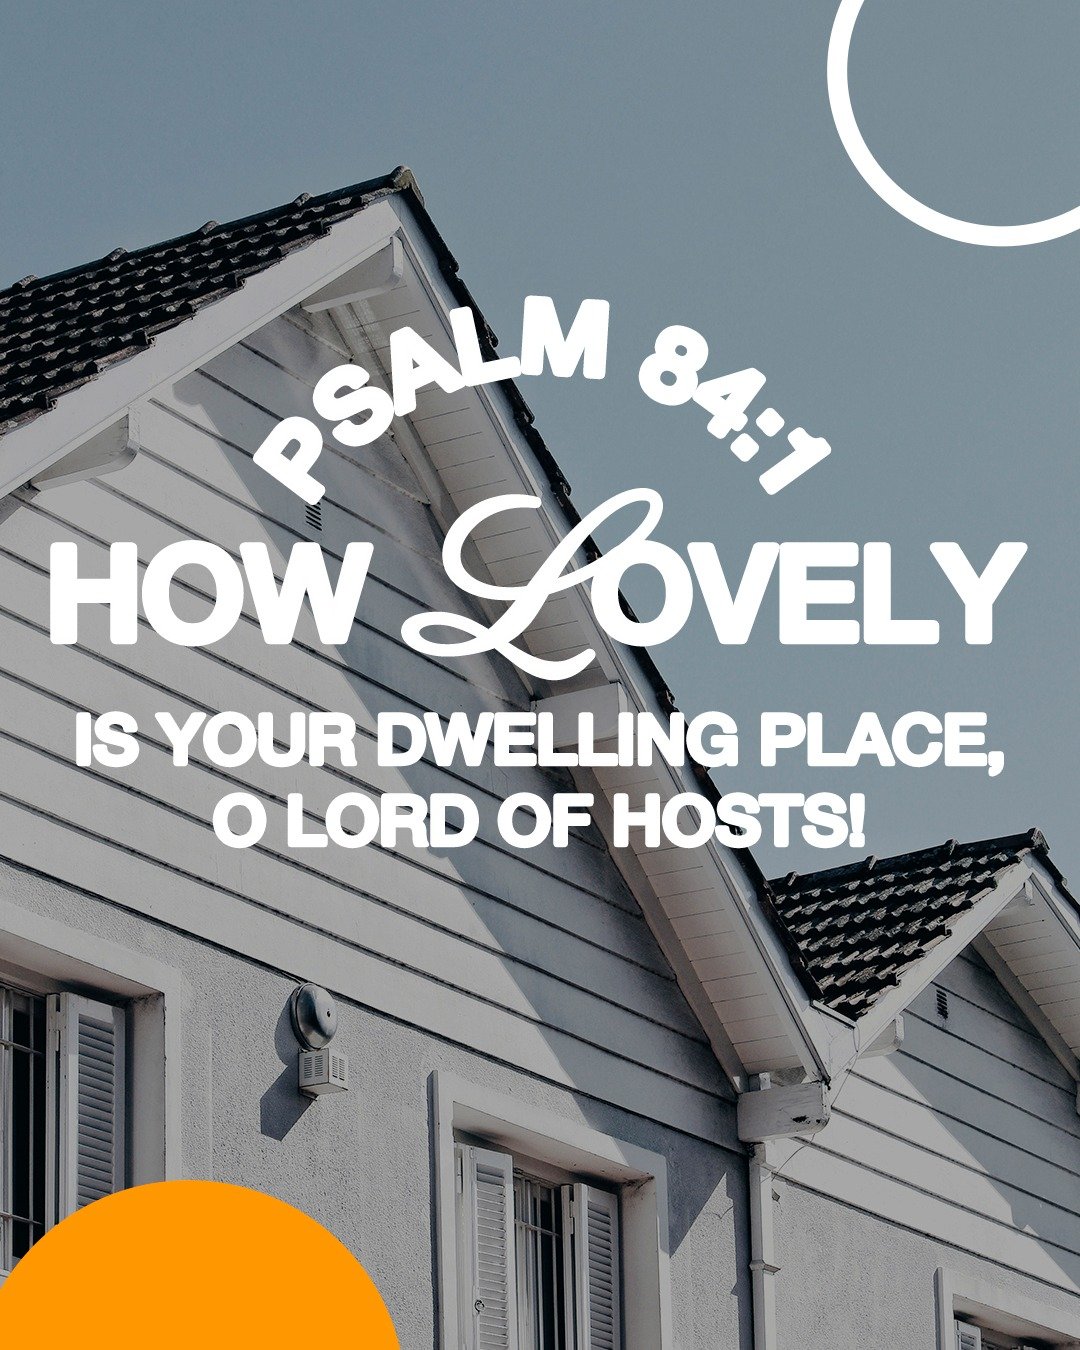 How *lovely* is your dwelling place! Join us as we dive into our new series this Sunday as a church!